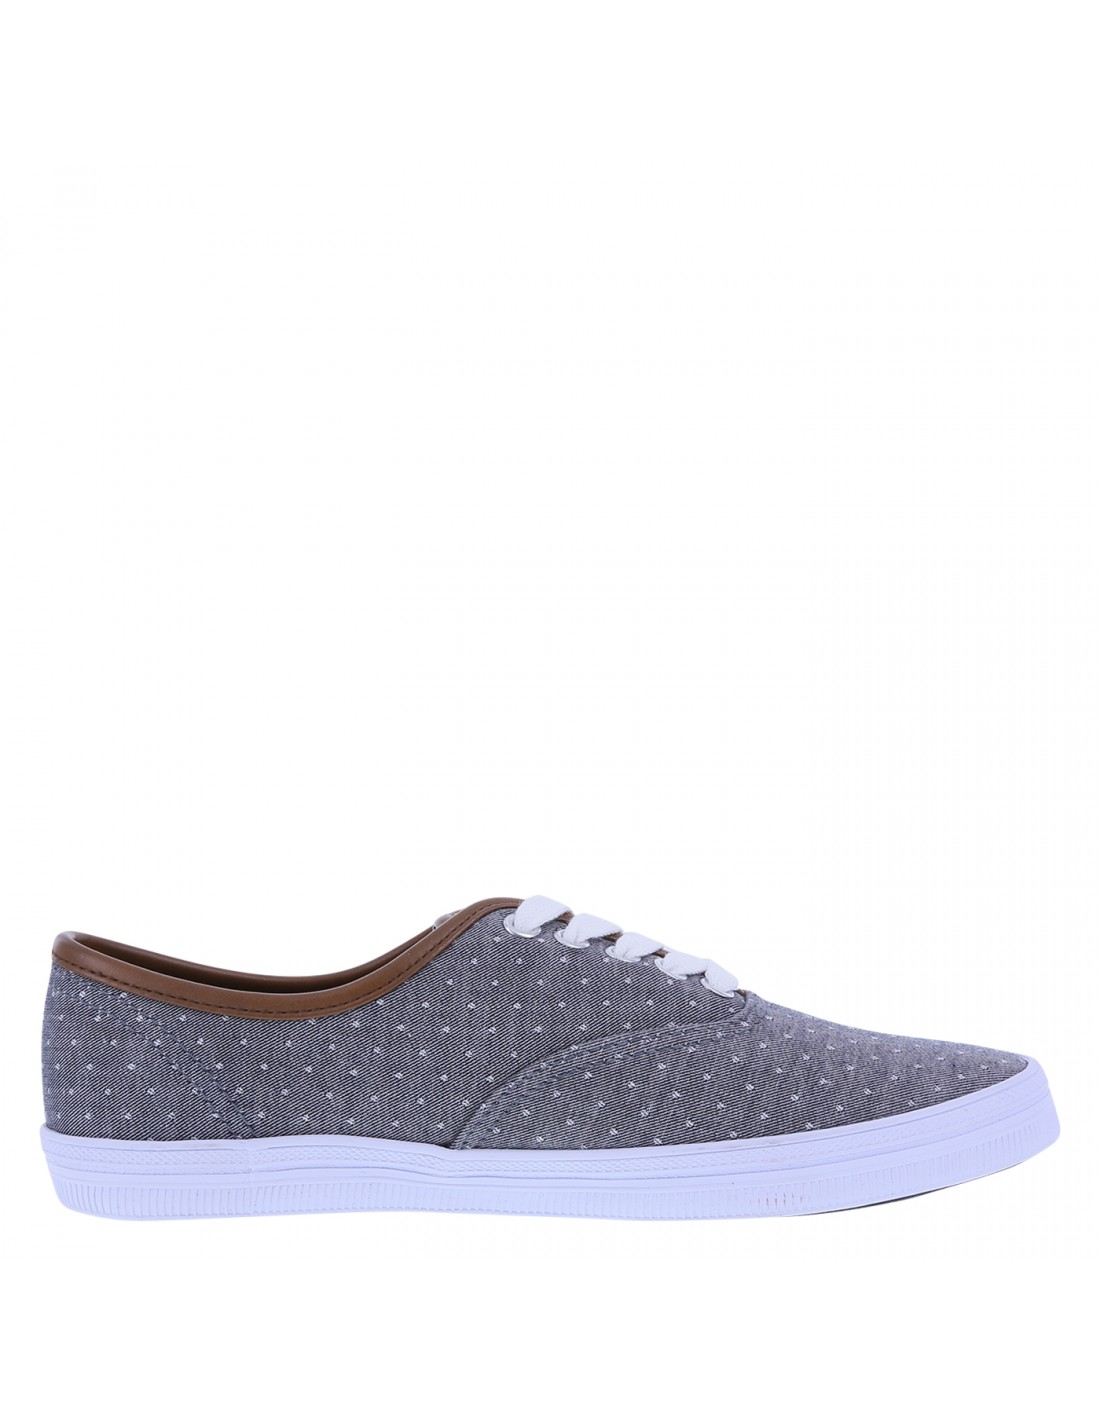 Classic Bal Casuals | Payless Colombia